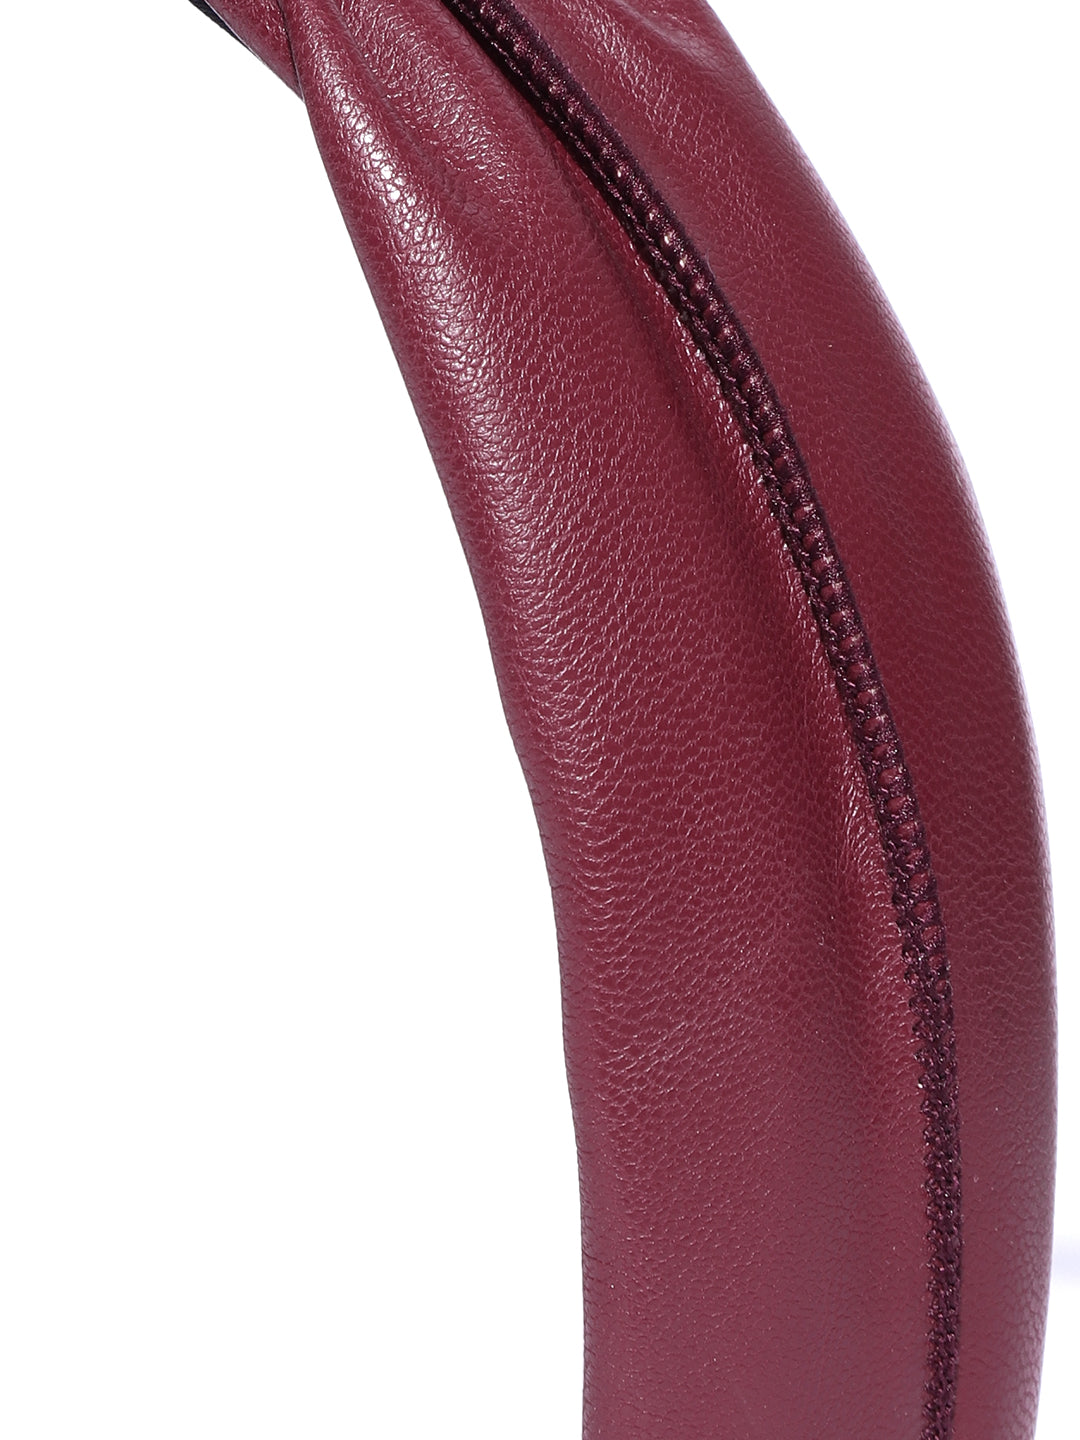 Blueberry red synthetic leather knot hairband